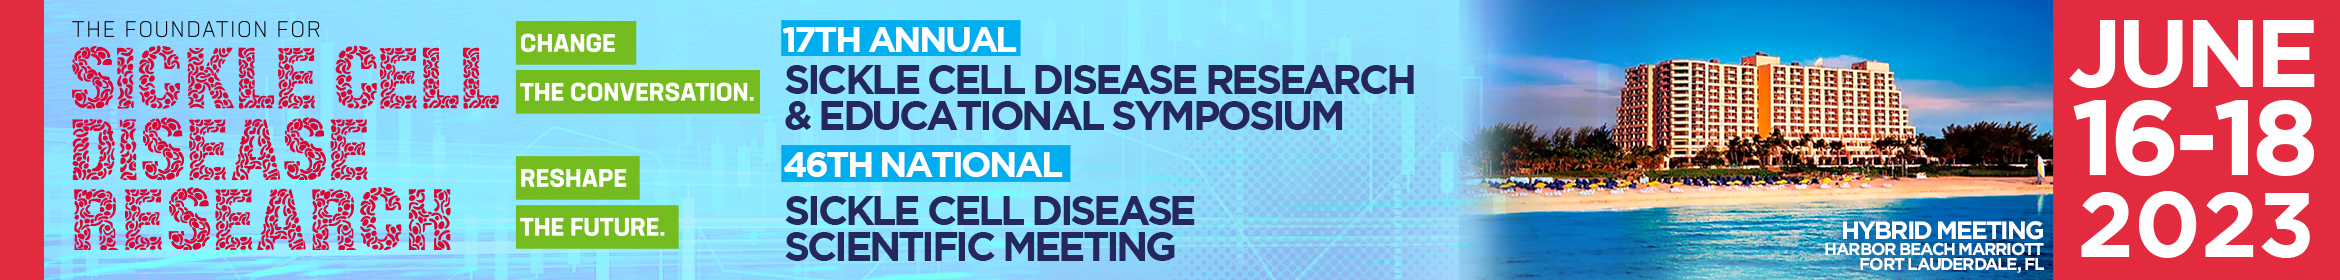 FSCDR's 17th Annual Sickle Cell Disease Research and Educational Symposium and 46th National Sickle Cell Disease Scientific Meeting 2023 Main banner